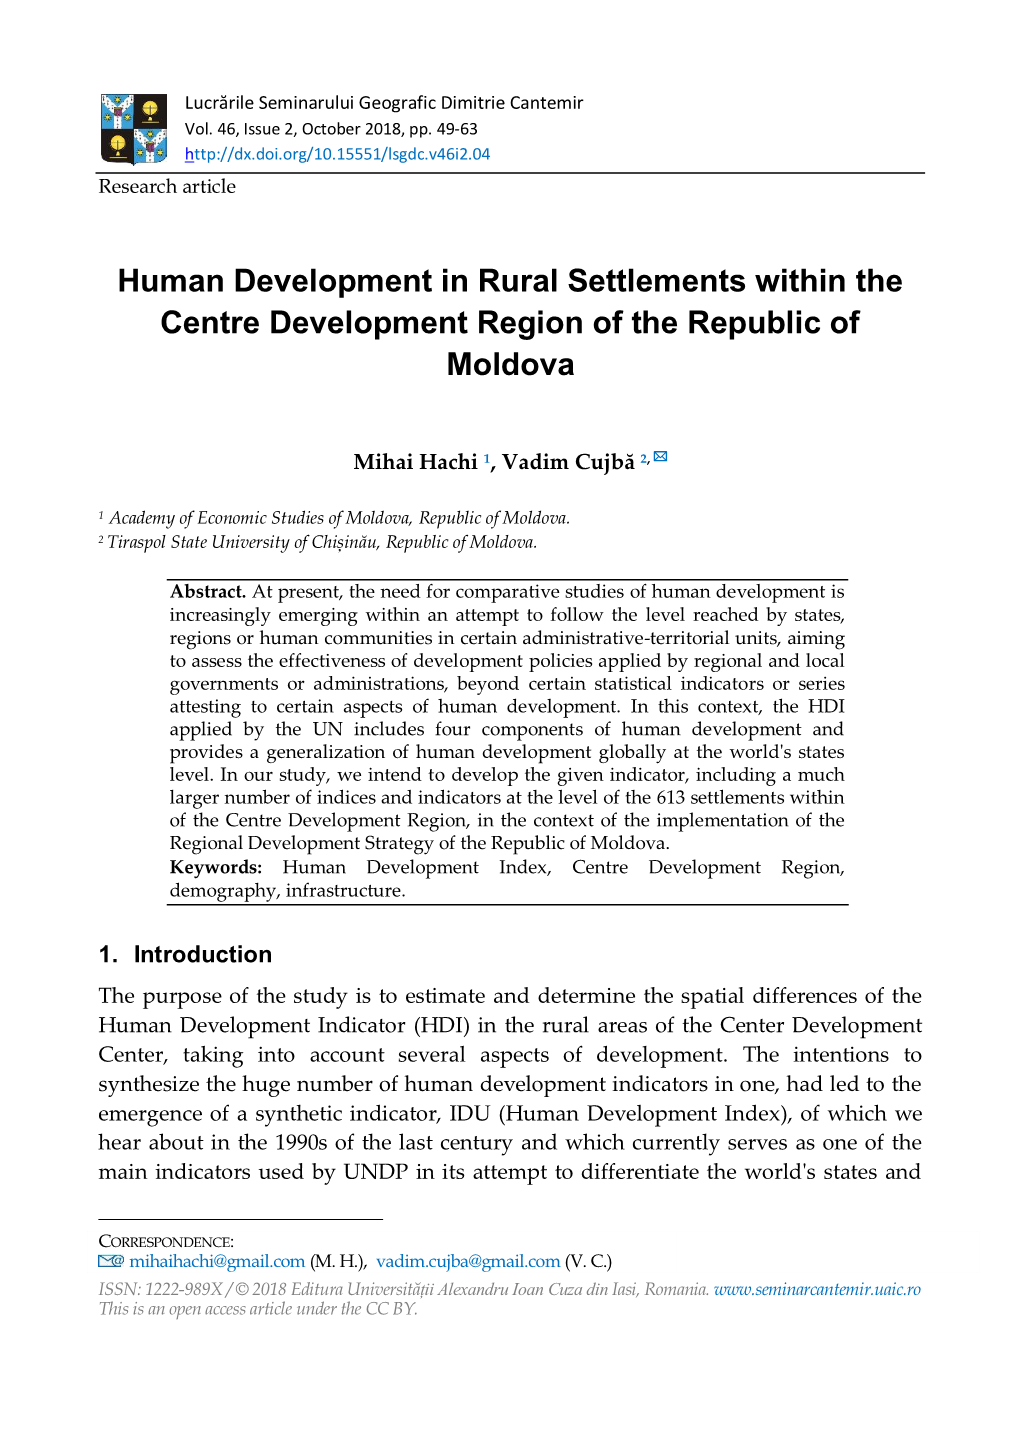 Human Development in Rural Settlements Within the Centre Development Region of the Republic of Moldova